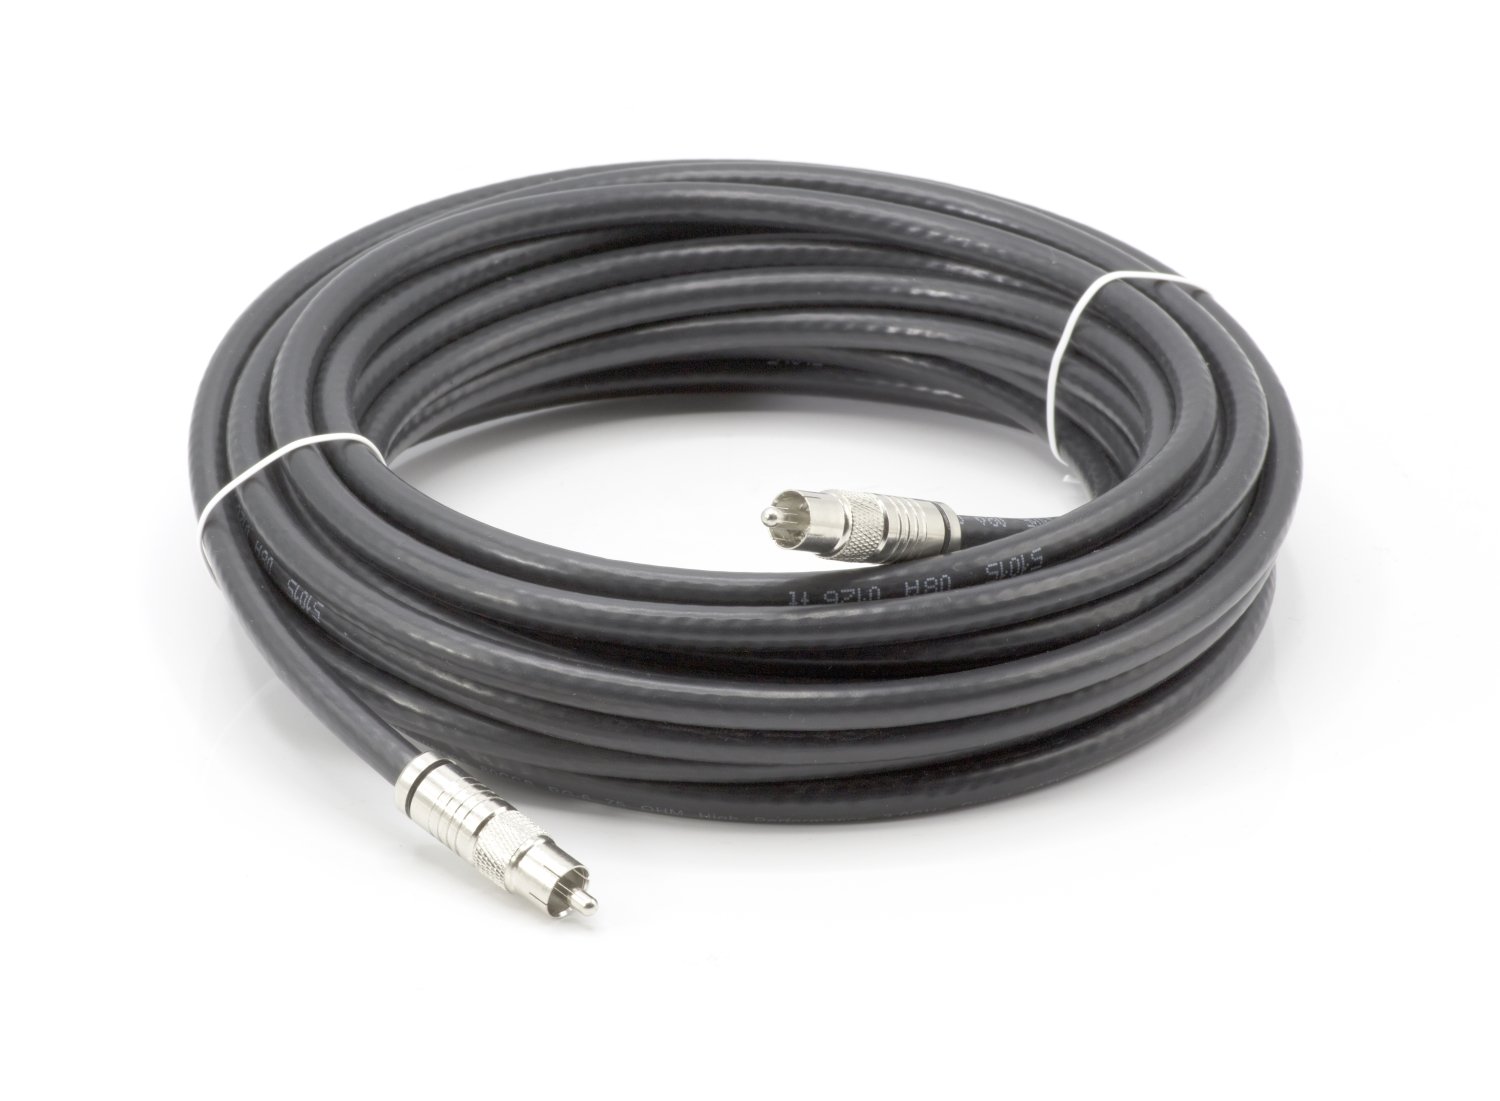 THE CIMPLE CO - Digital Audio Coaxial Cable - Subwoofer Cable - (S/PDIF) RCA Cable, 150 Feet - image 1 of 6